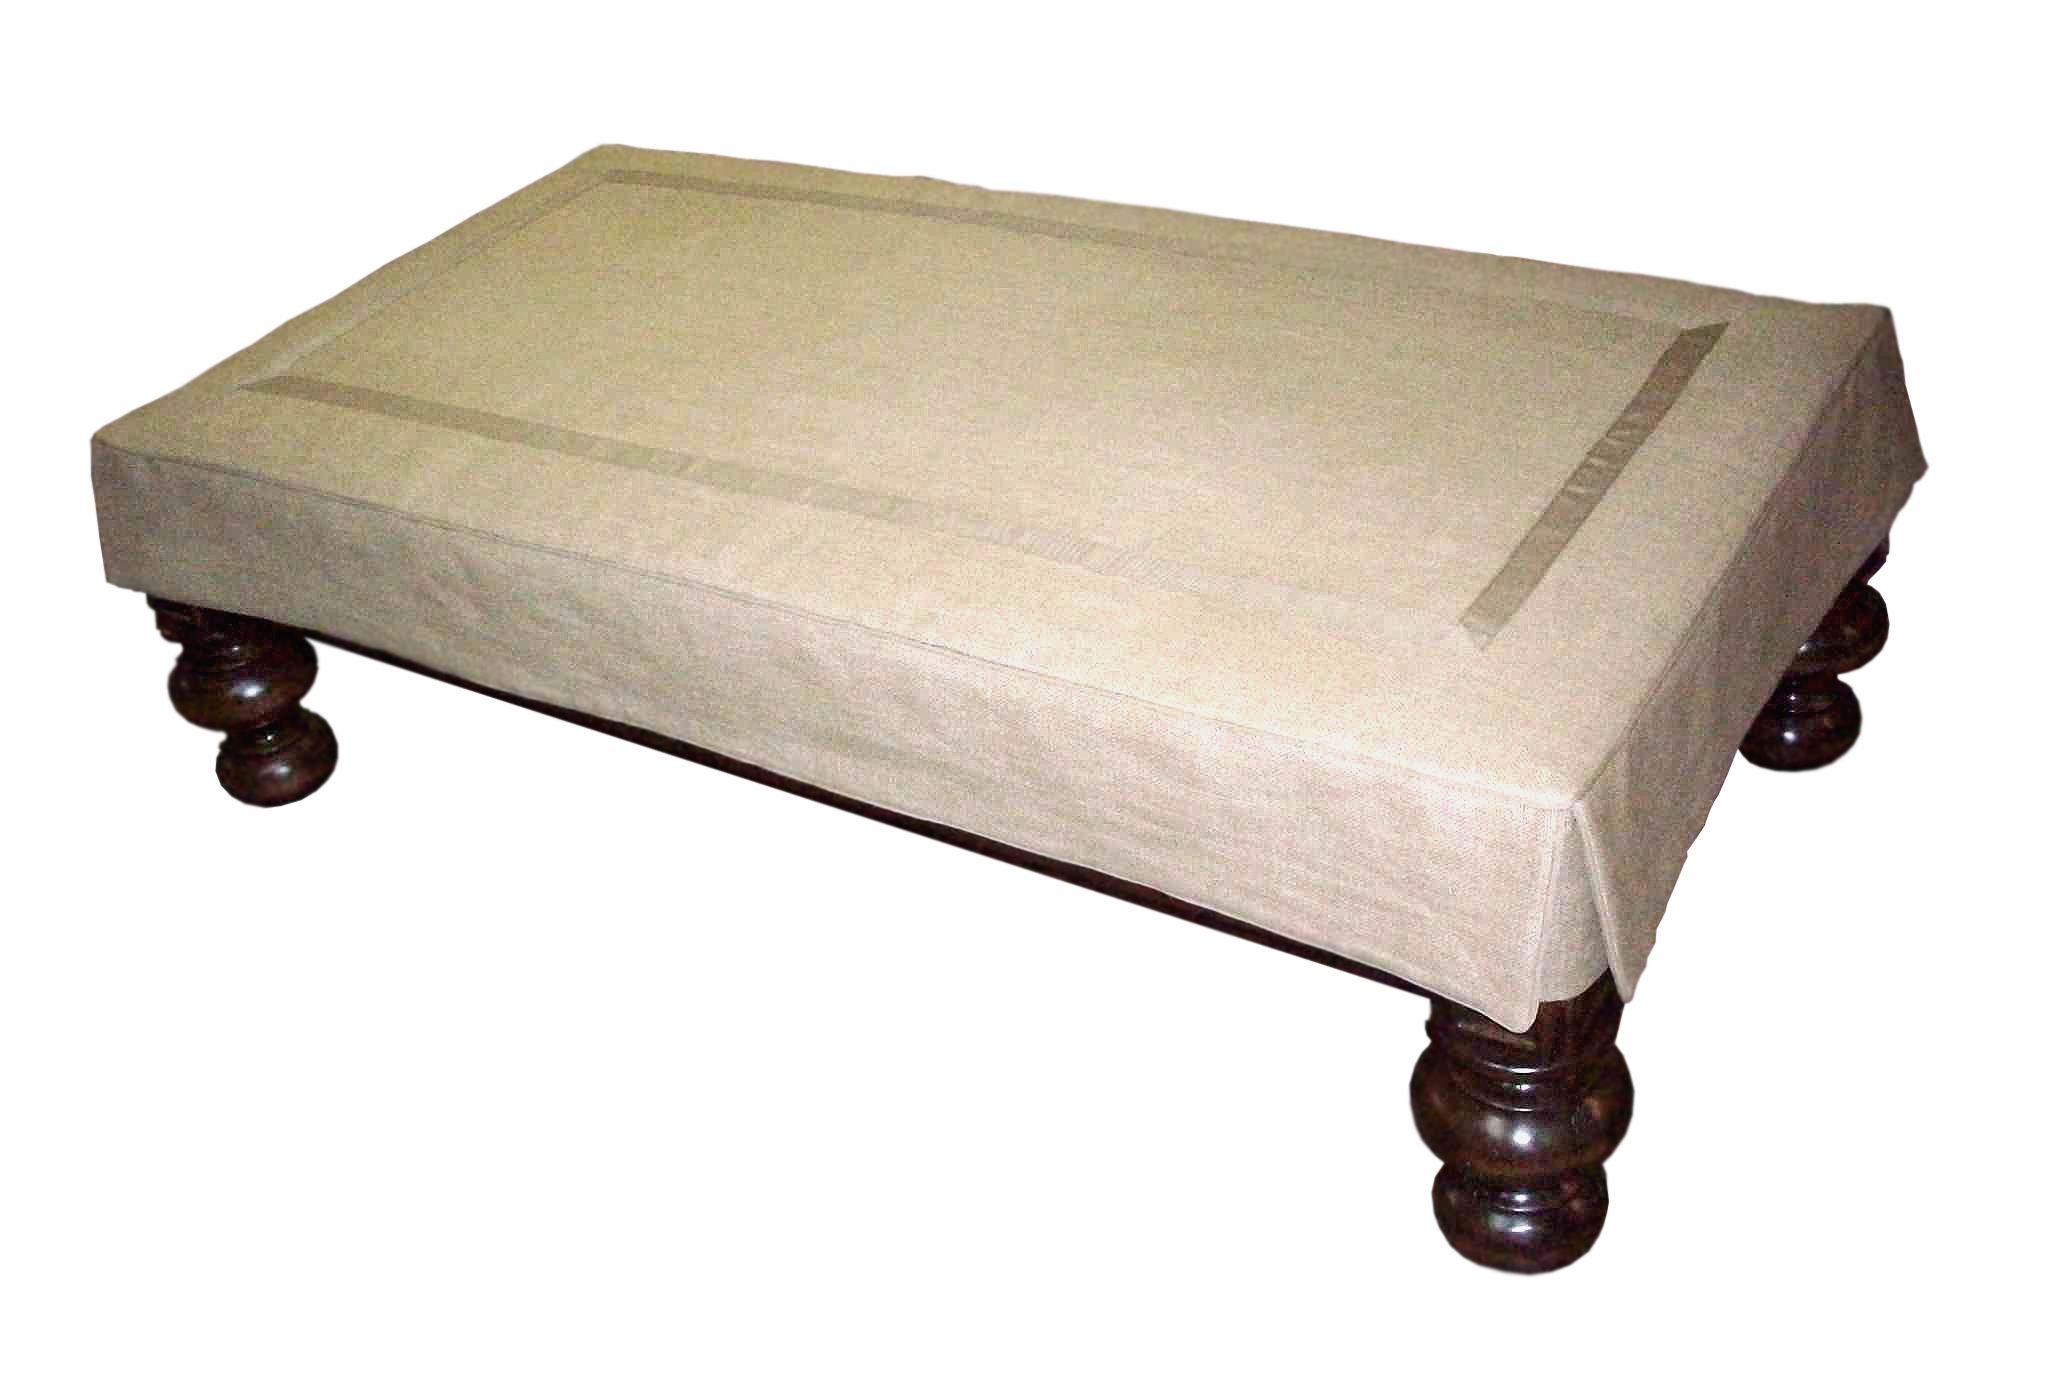 Upholstered Deauville Ottoman with Slipcover